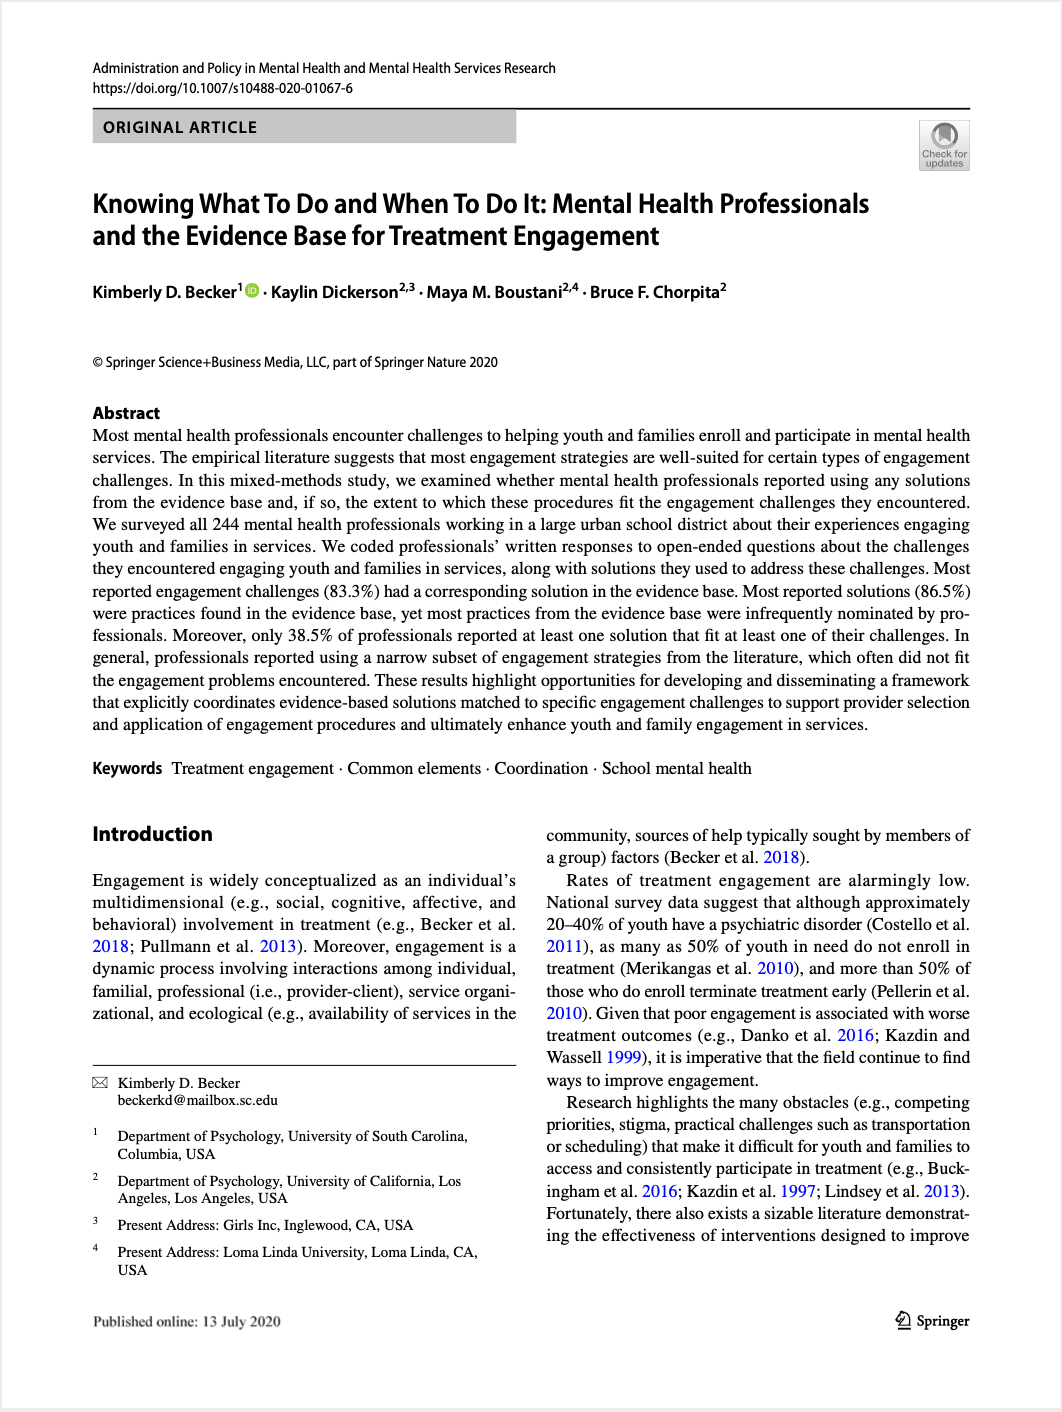 Knowing what to do and when to do it: Mental health professionals and the evidence base for treatment engagement